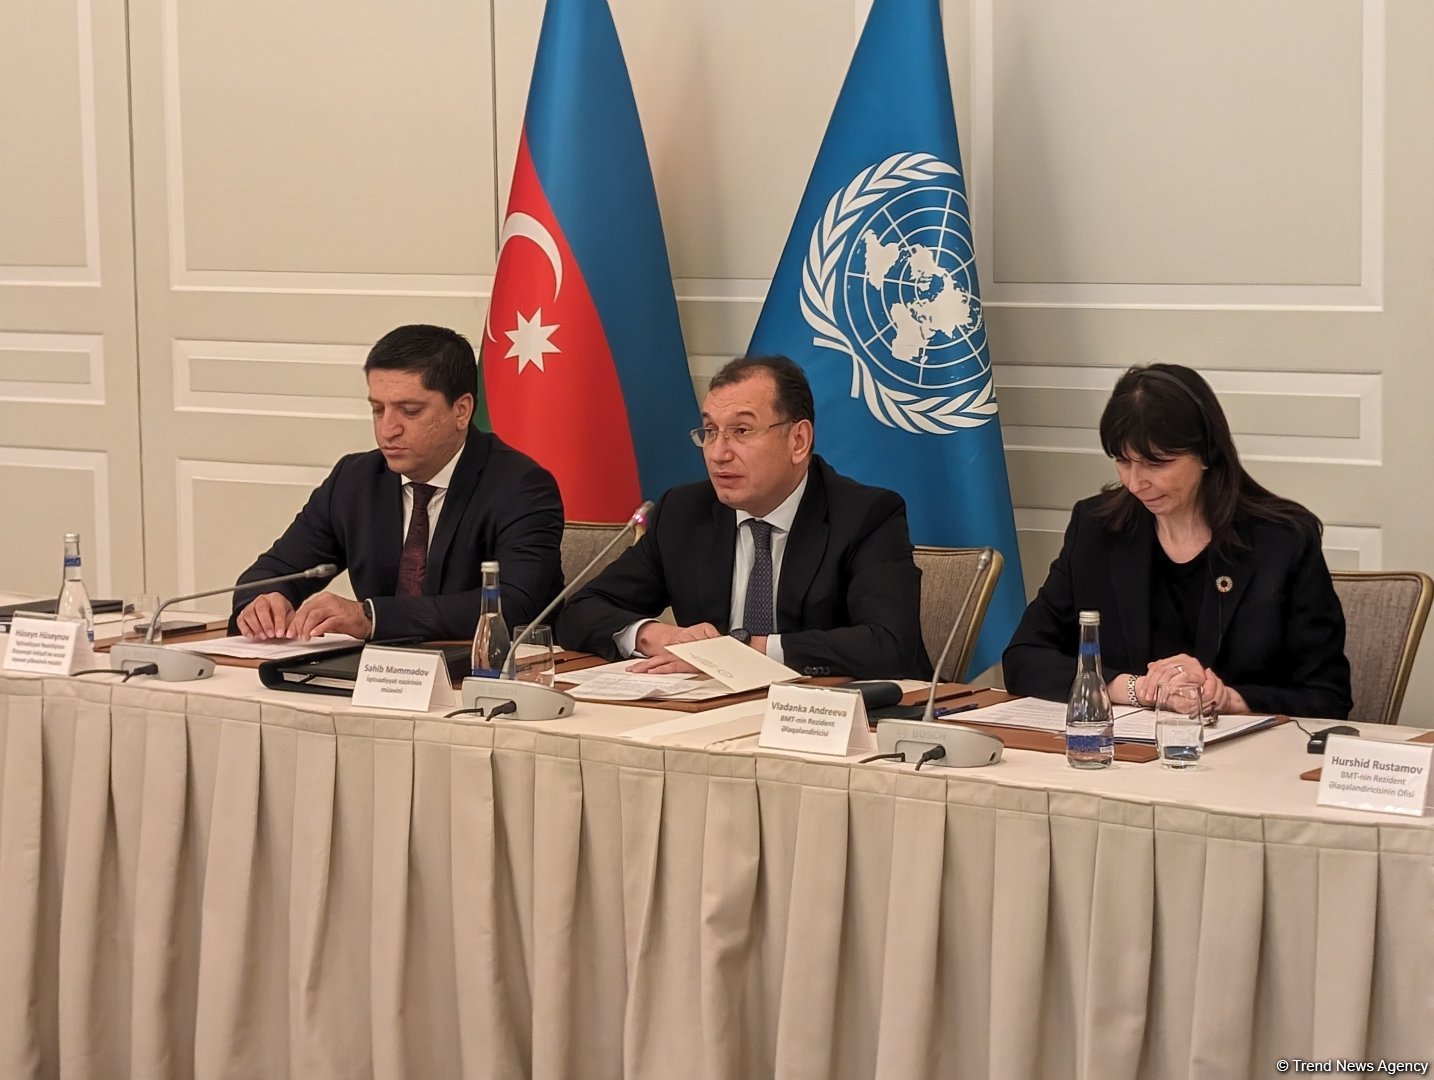 Azerbaijan to launch new climate finance initiatives within COP29